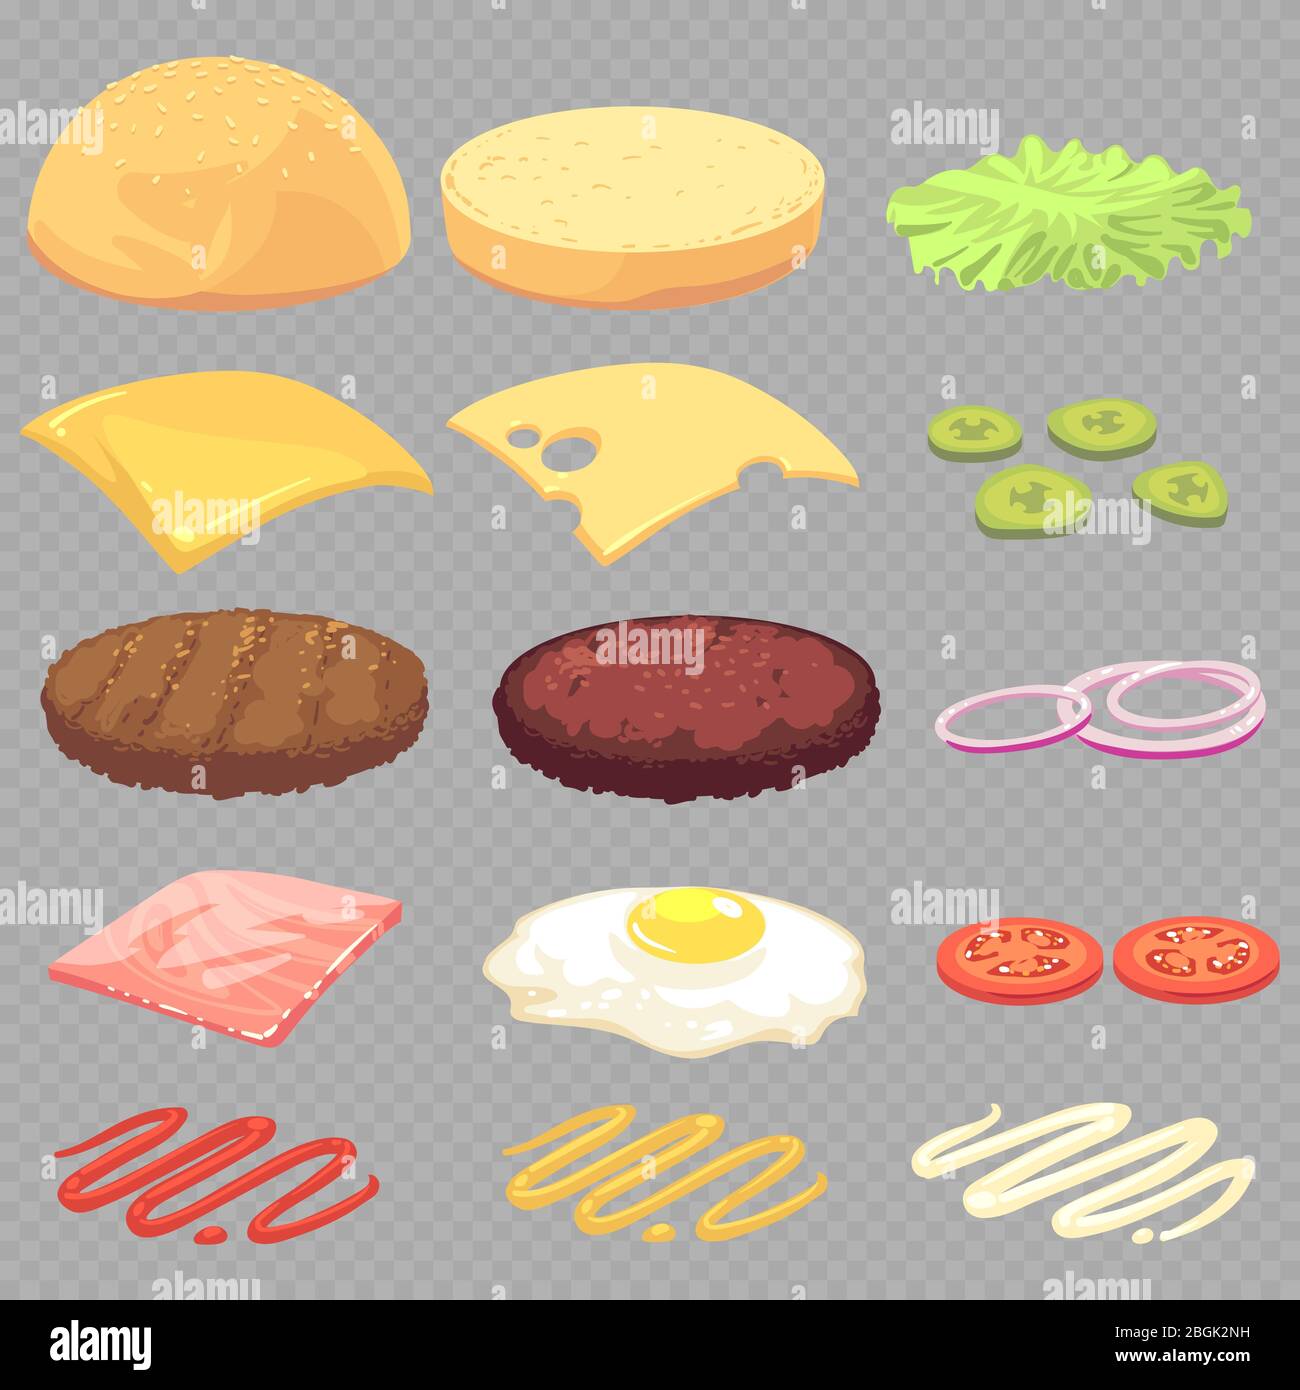 Sandwich, burger, cheeseburger food ingredients cartoon vector set isolated on transparent background. Vector cheese and meat, tasty and fast illustration Stock Vector